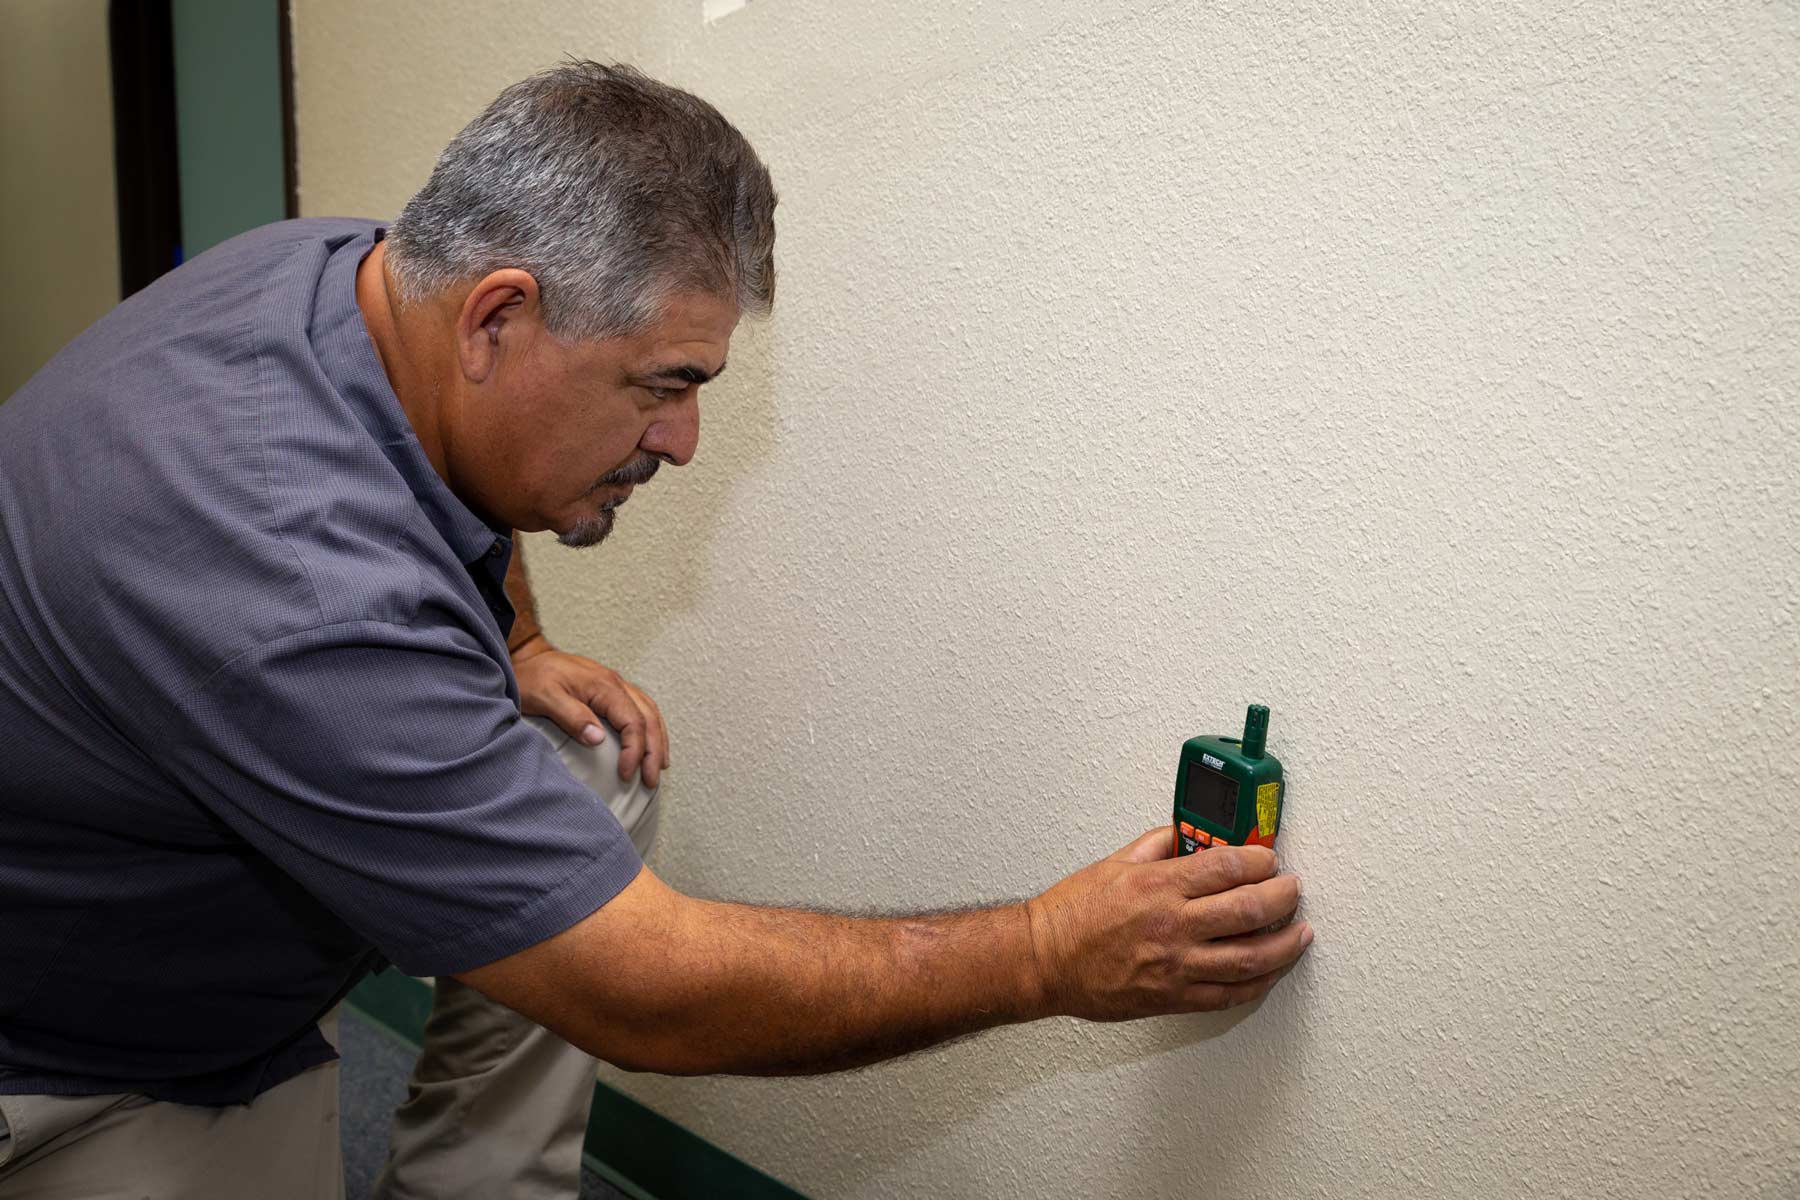 Experienced water damage restoration technician testing wall for moisture